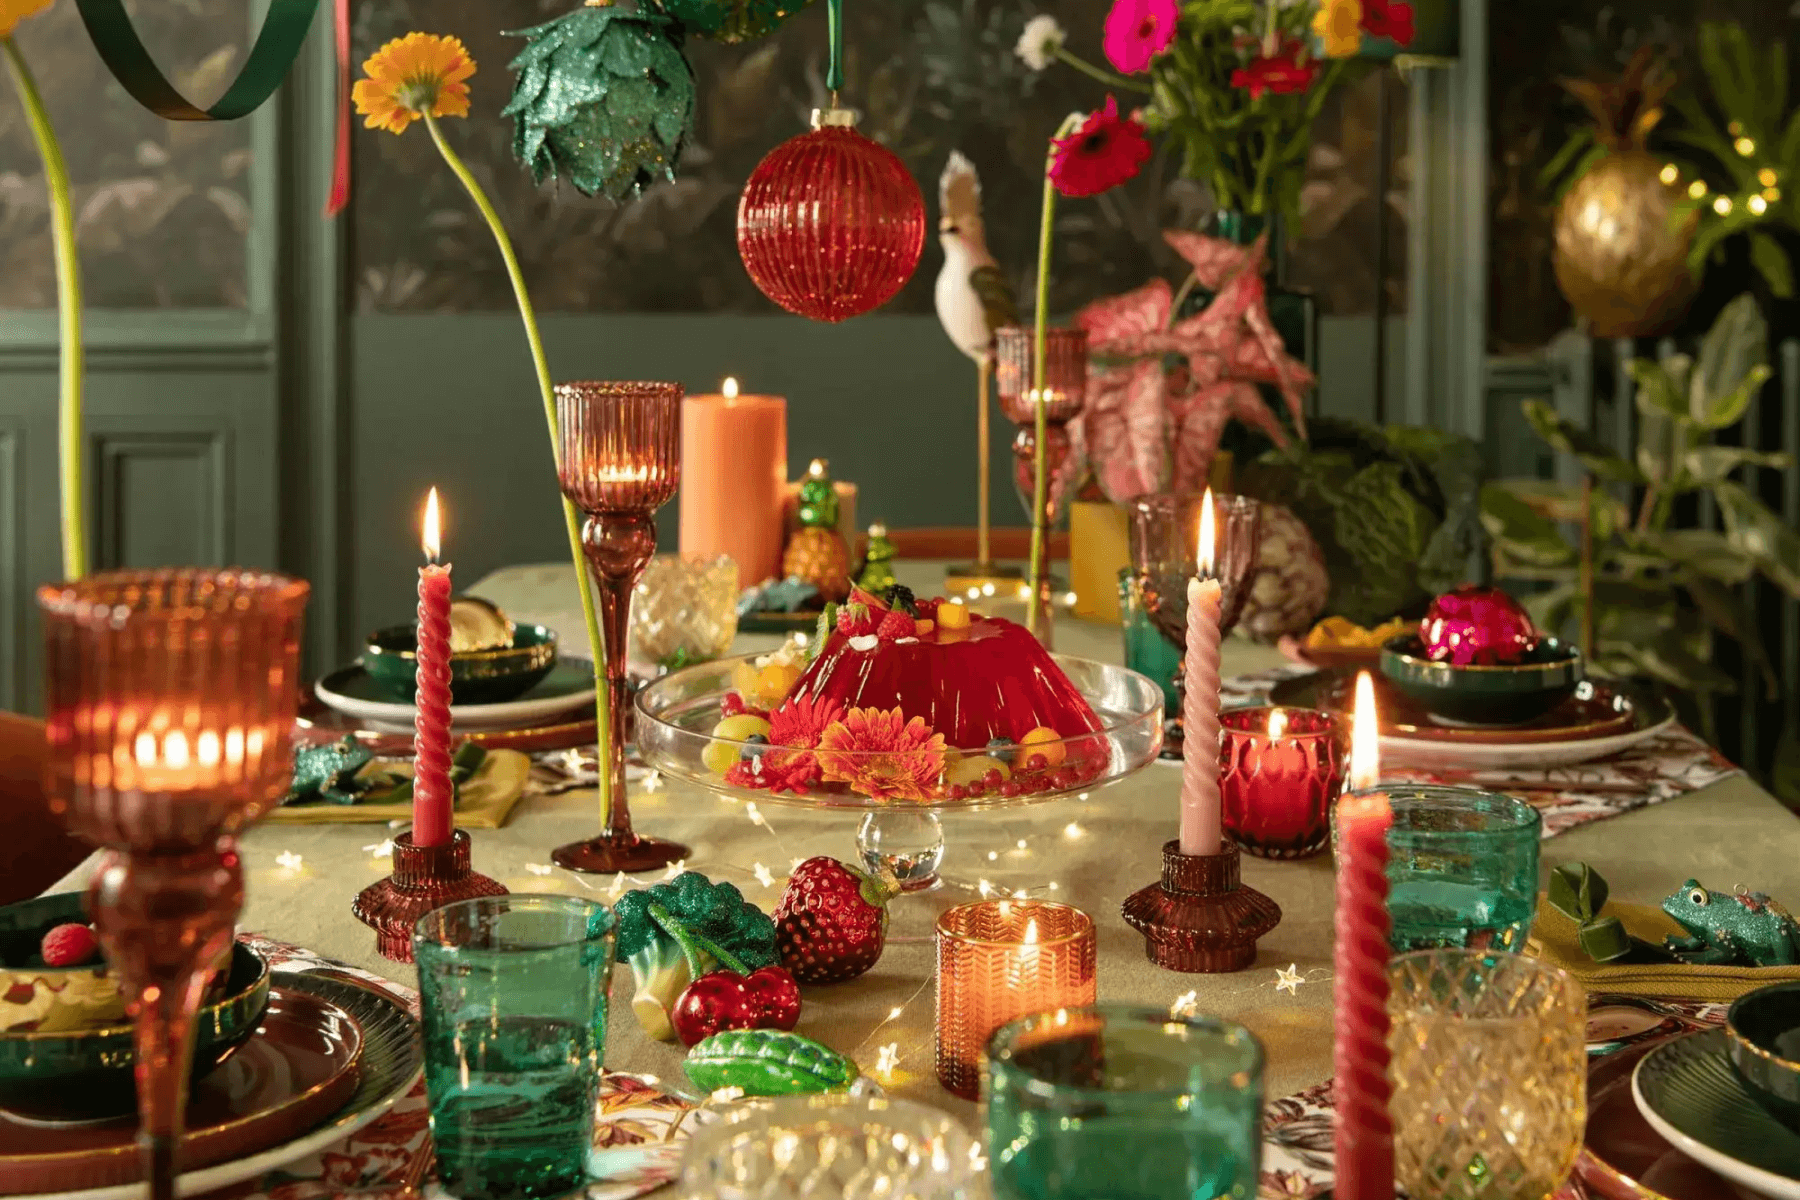 A table is set with colorful glassware, food-shaped Christmas tree ornaments, taper candles, and single-stem flowers.